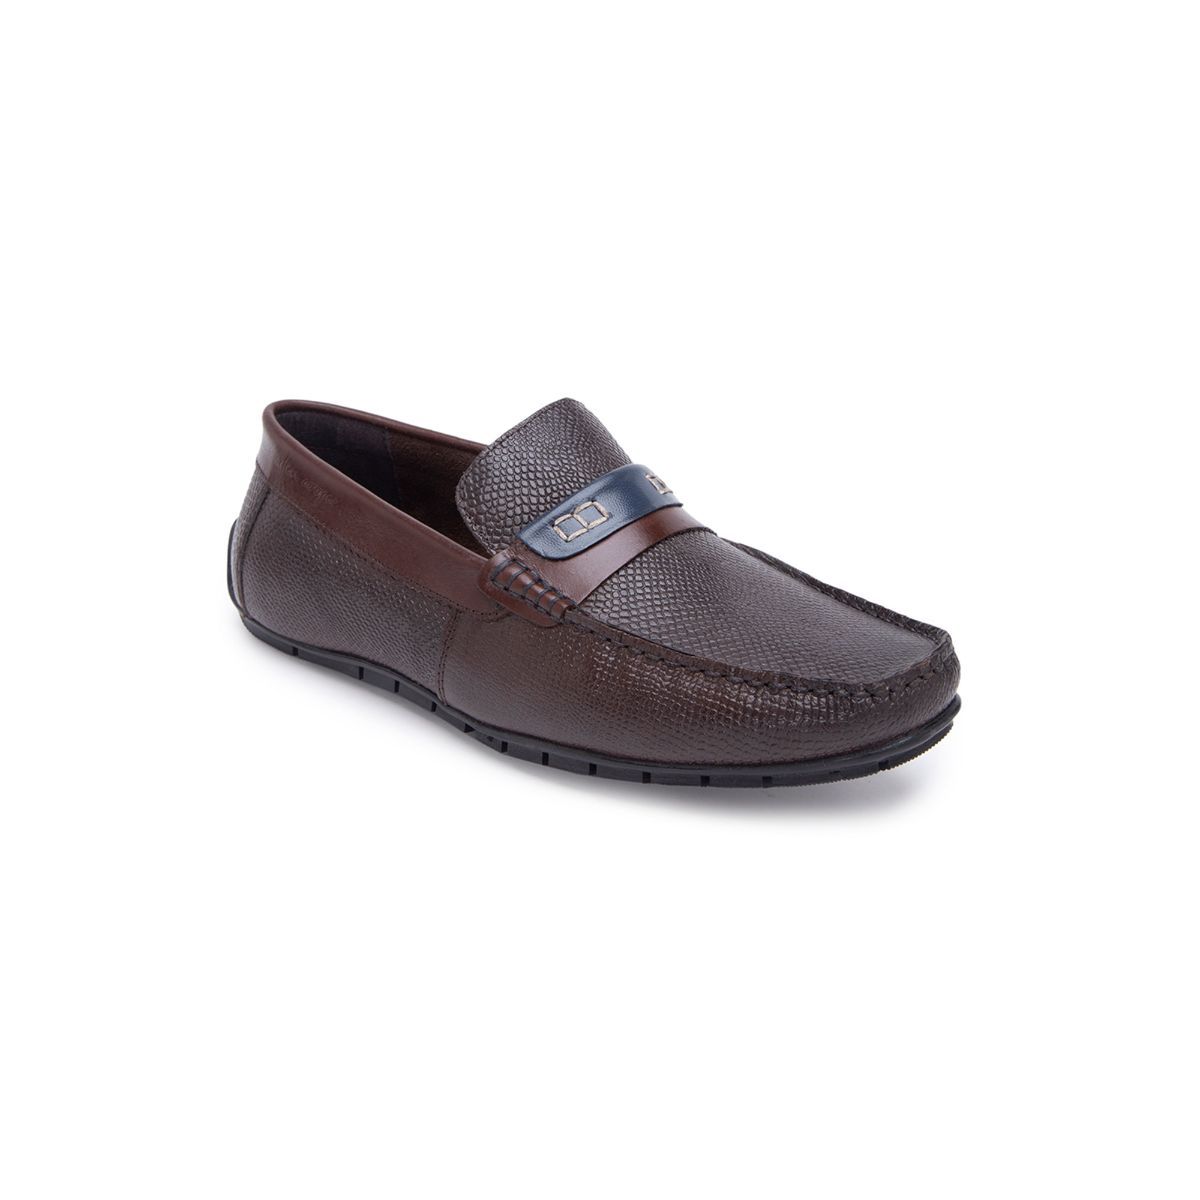 Allen Cooper Brown Leather Casual Shoes - 7